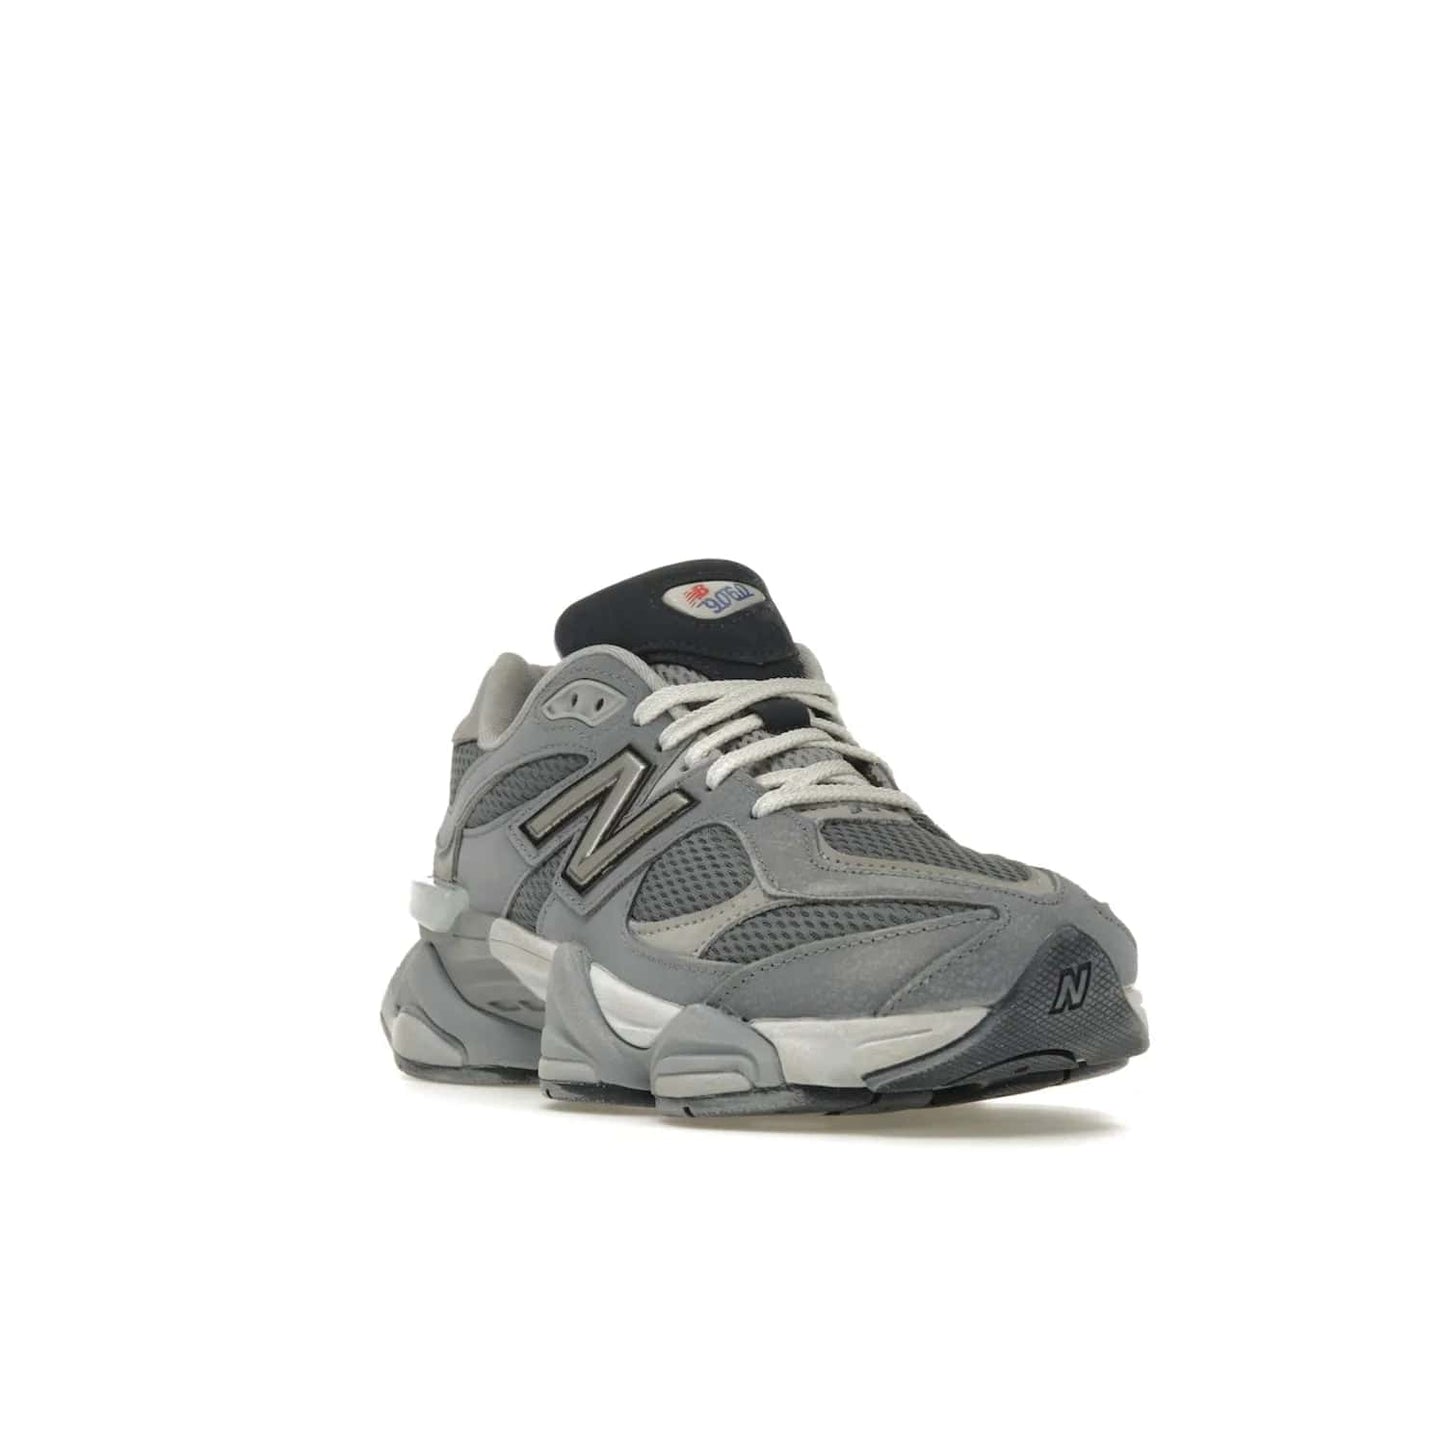 New Balance 9060 Grey Day (2023) - Image 7 - Only at www.BallersClubKickz.com - #
Sporty-meets-stylish in the New Balance 9060 Grey Day sneaker. Designed with Arctic Grey, Steel, and Silver Metallic, it offers an edgy but wearable look along with classic NB comfort and quality.